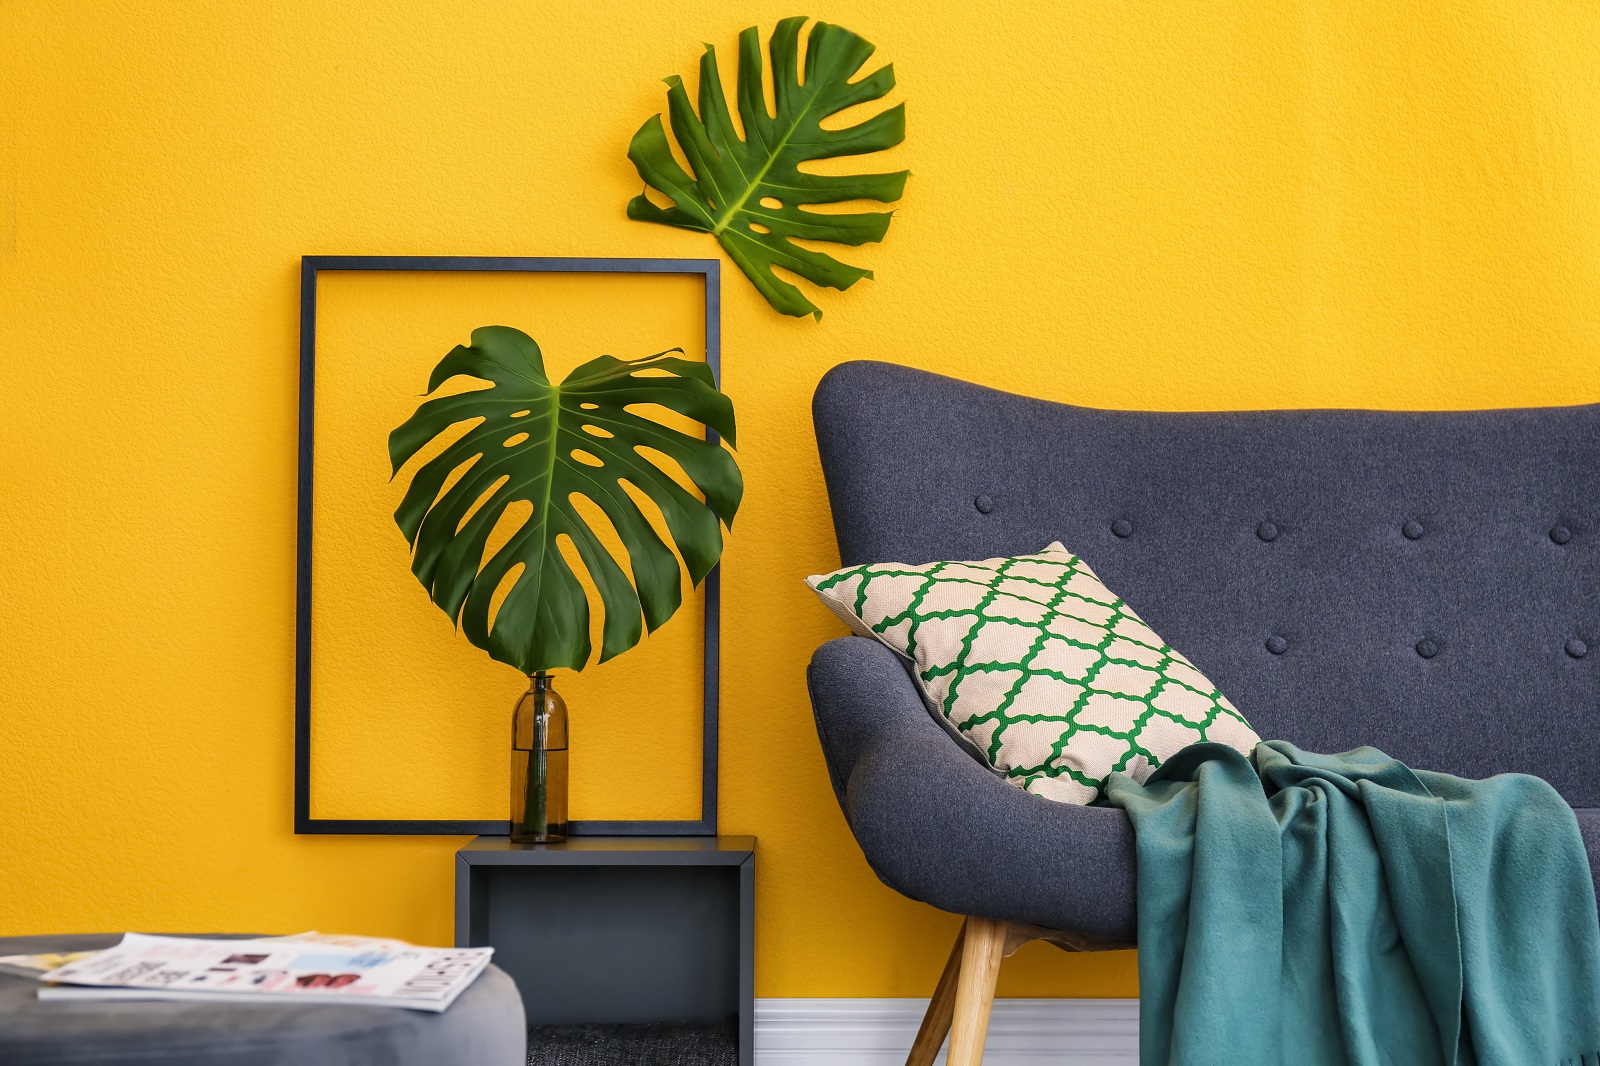 Things to Consider When Doing Major Design Changes in Your Home. Large plant at the background of yellow wall with decorative photo frame